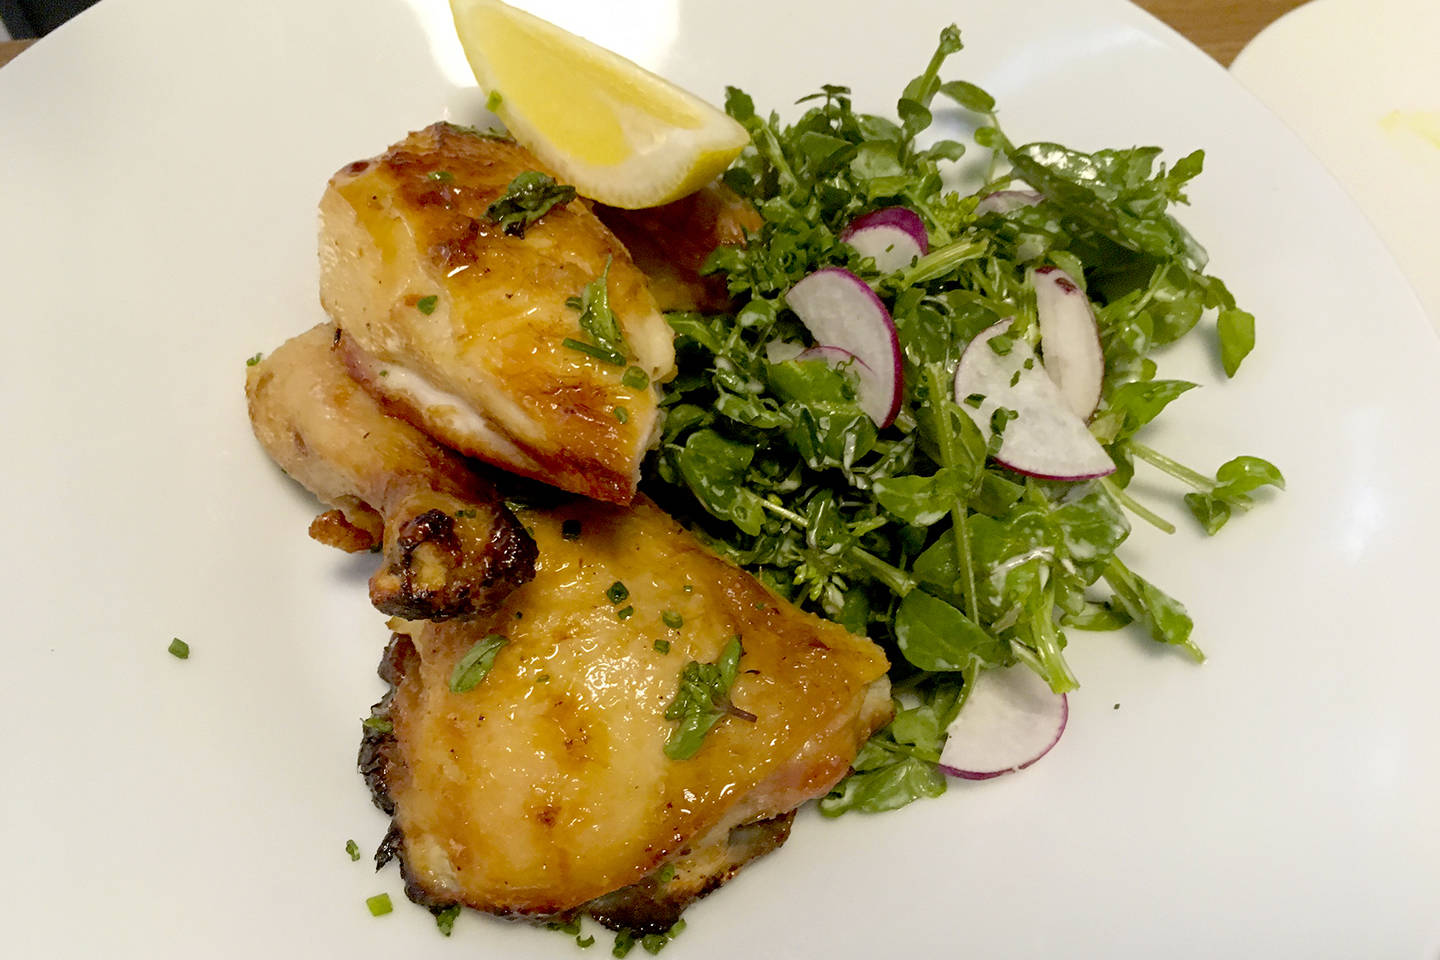 Roasted chicken with watercress and wild radish salad. Photo by Nicole Sprinkle